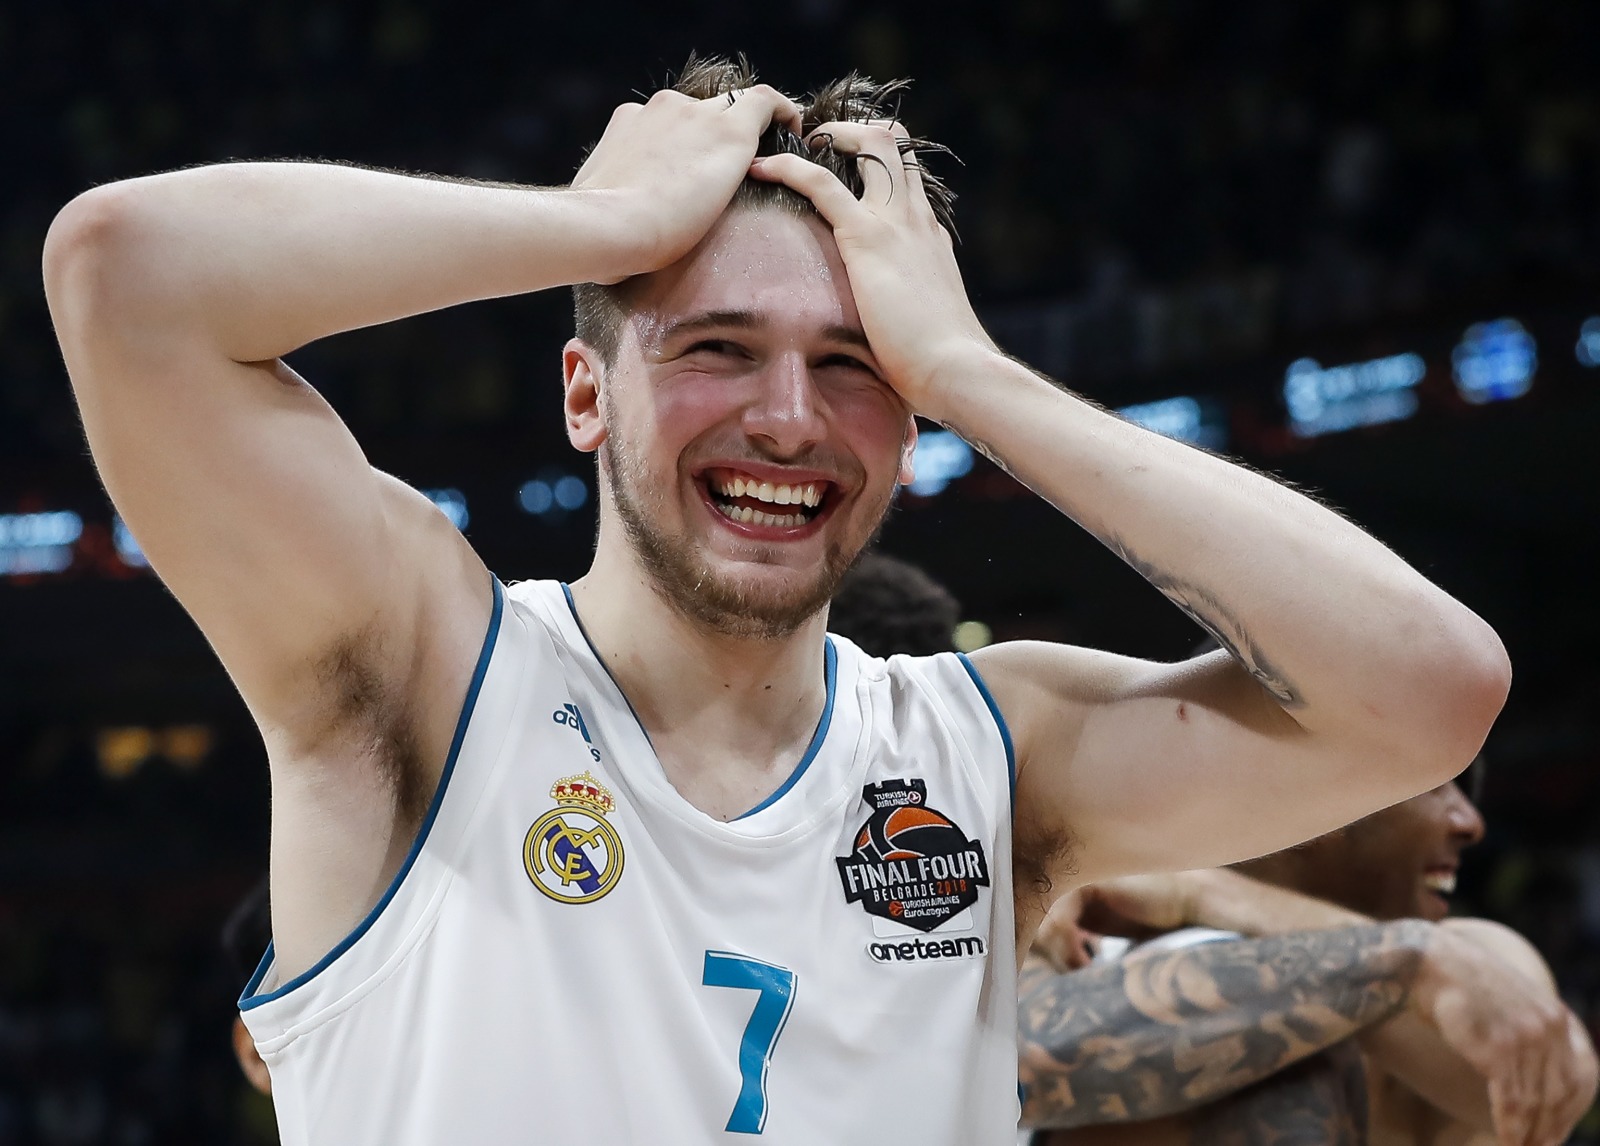 Luka Doncic Named Top Talent To Build Around In NBA Executives